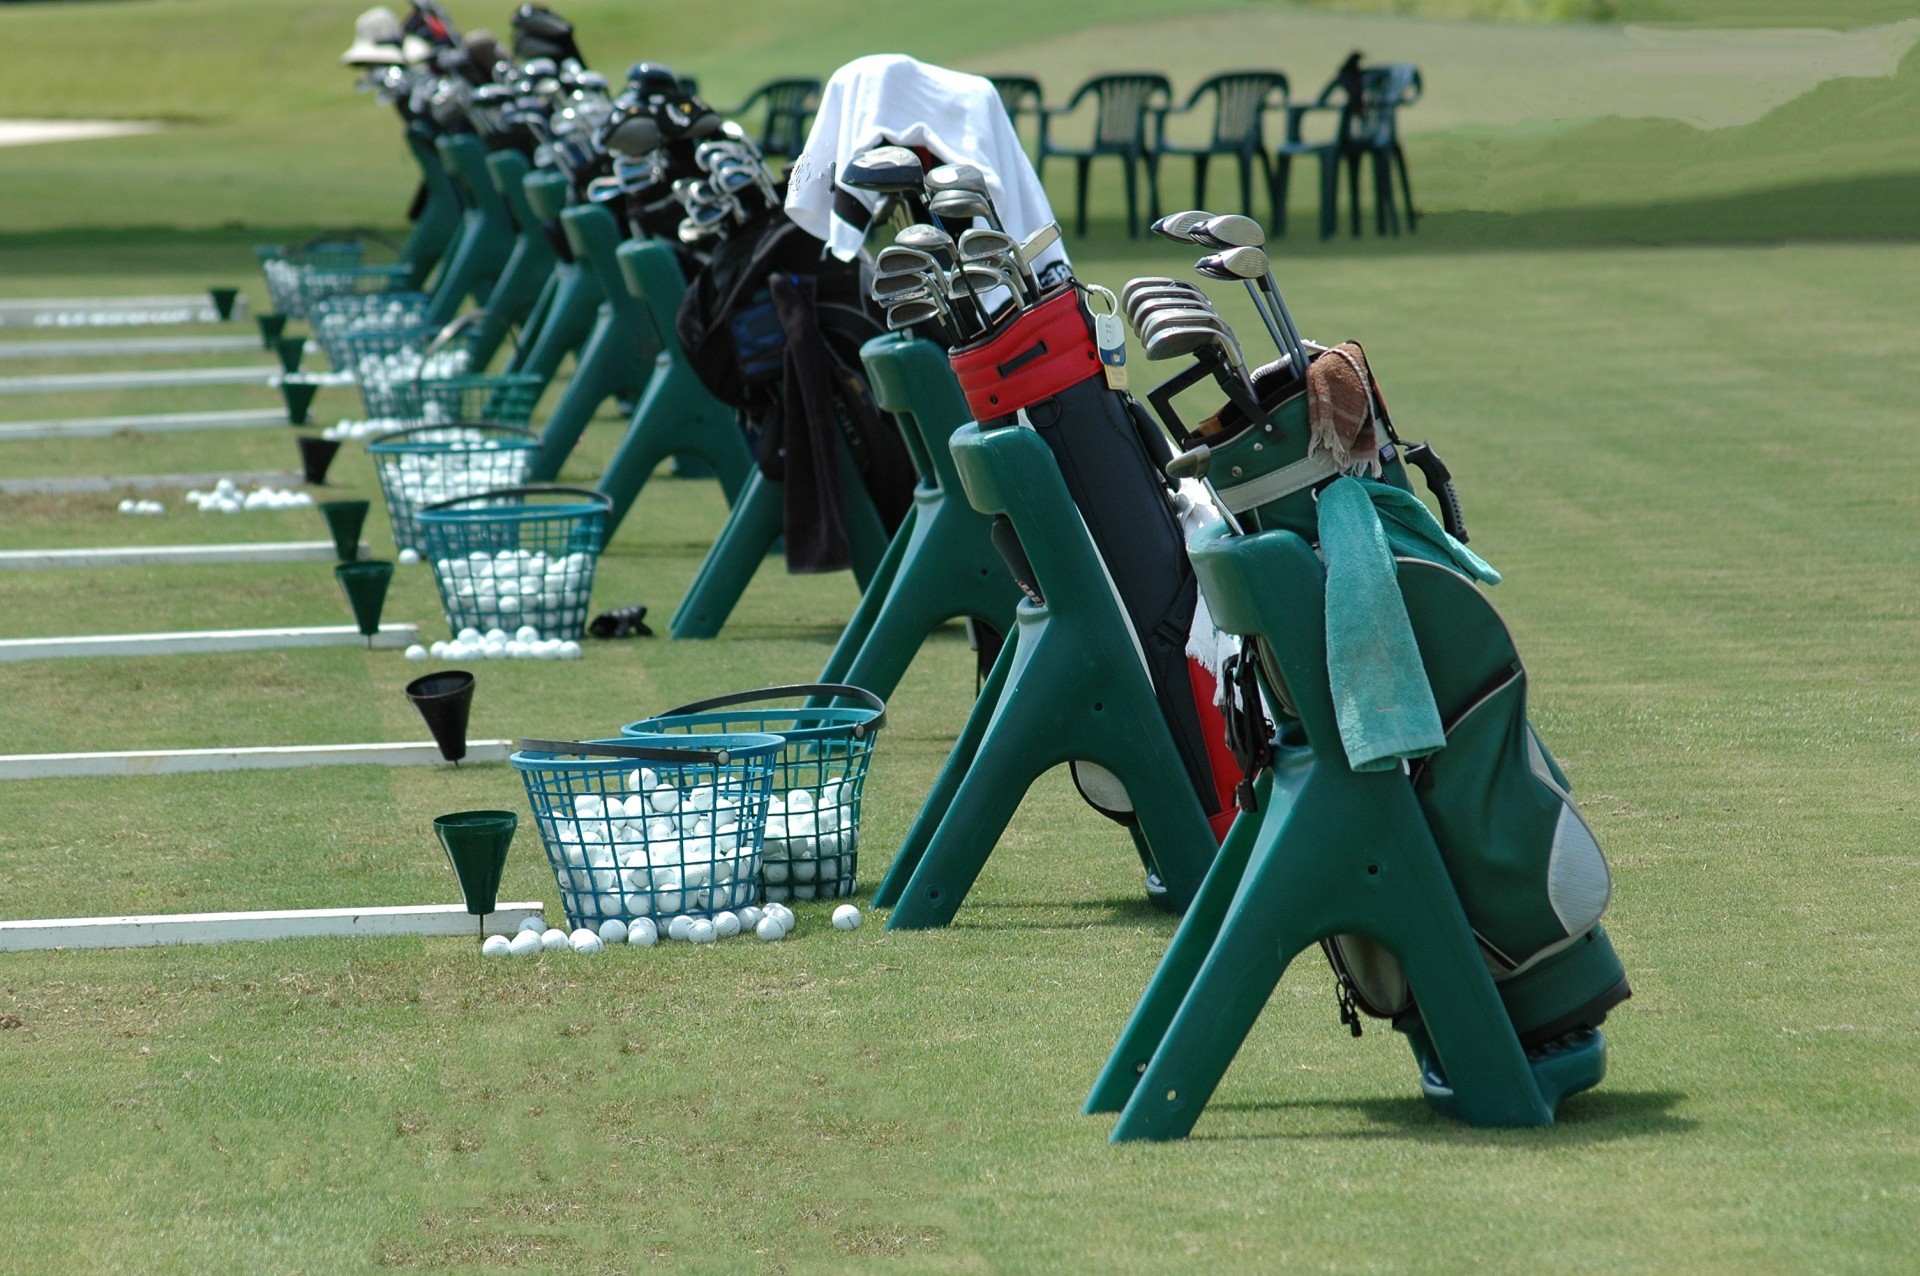 Golf bags lined up at a golf school Florida,  USA